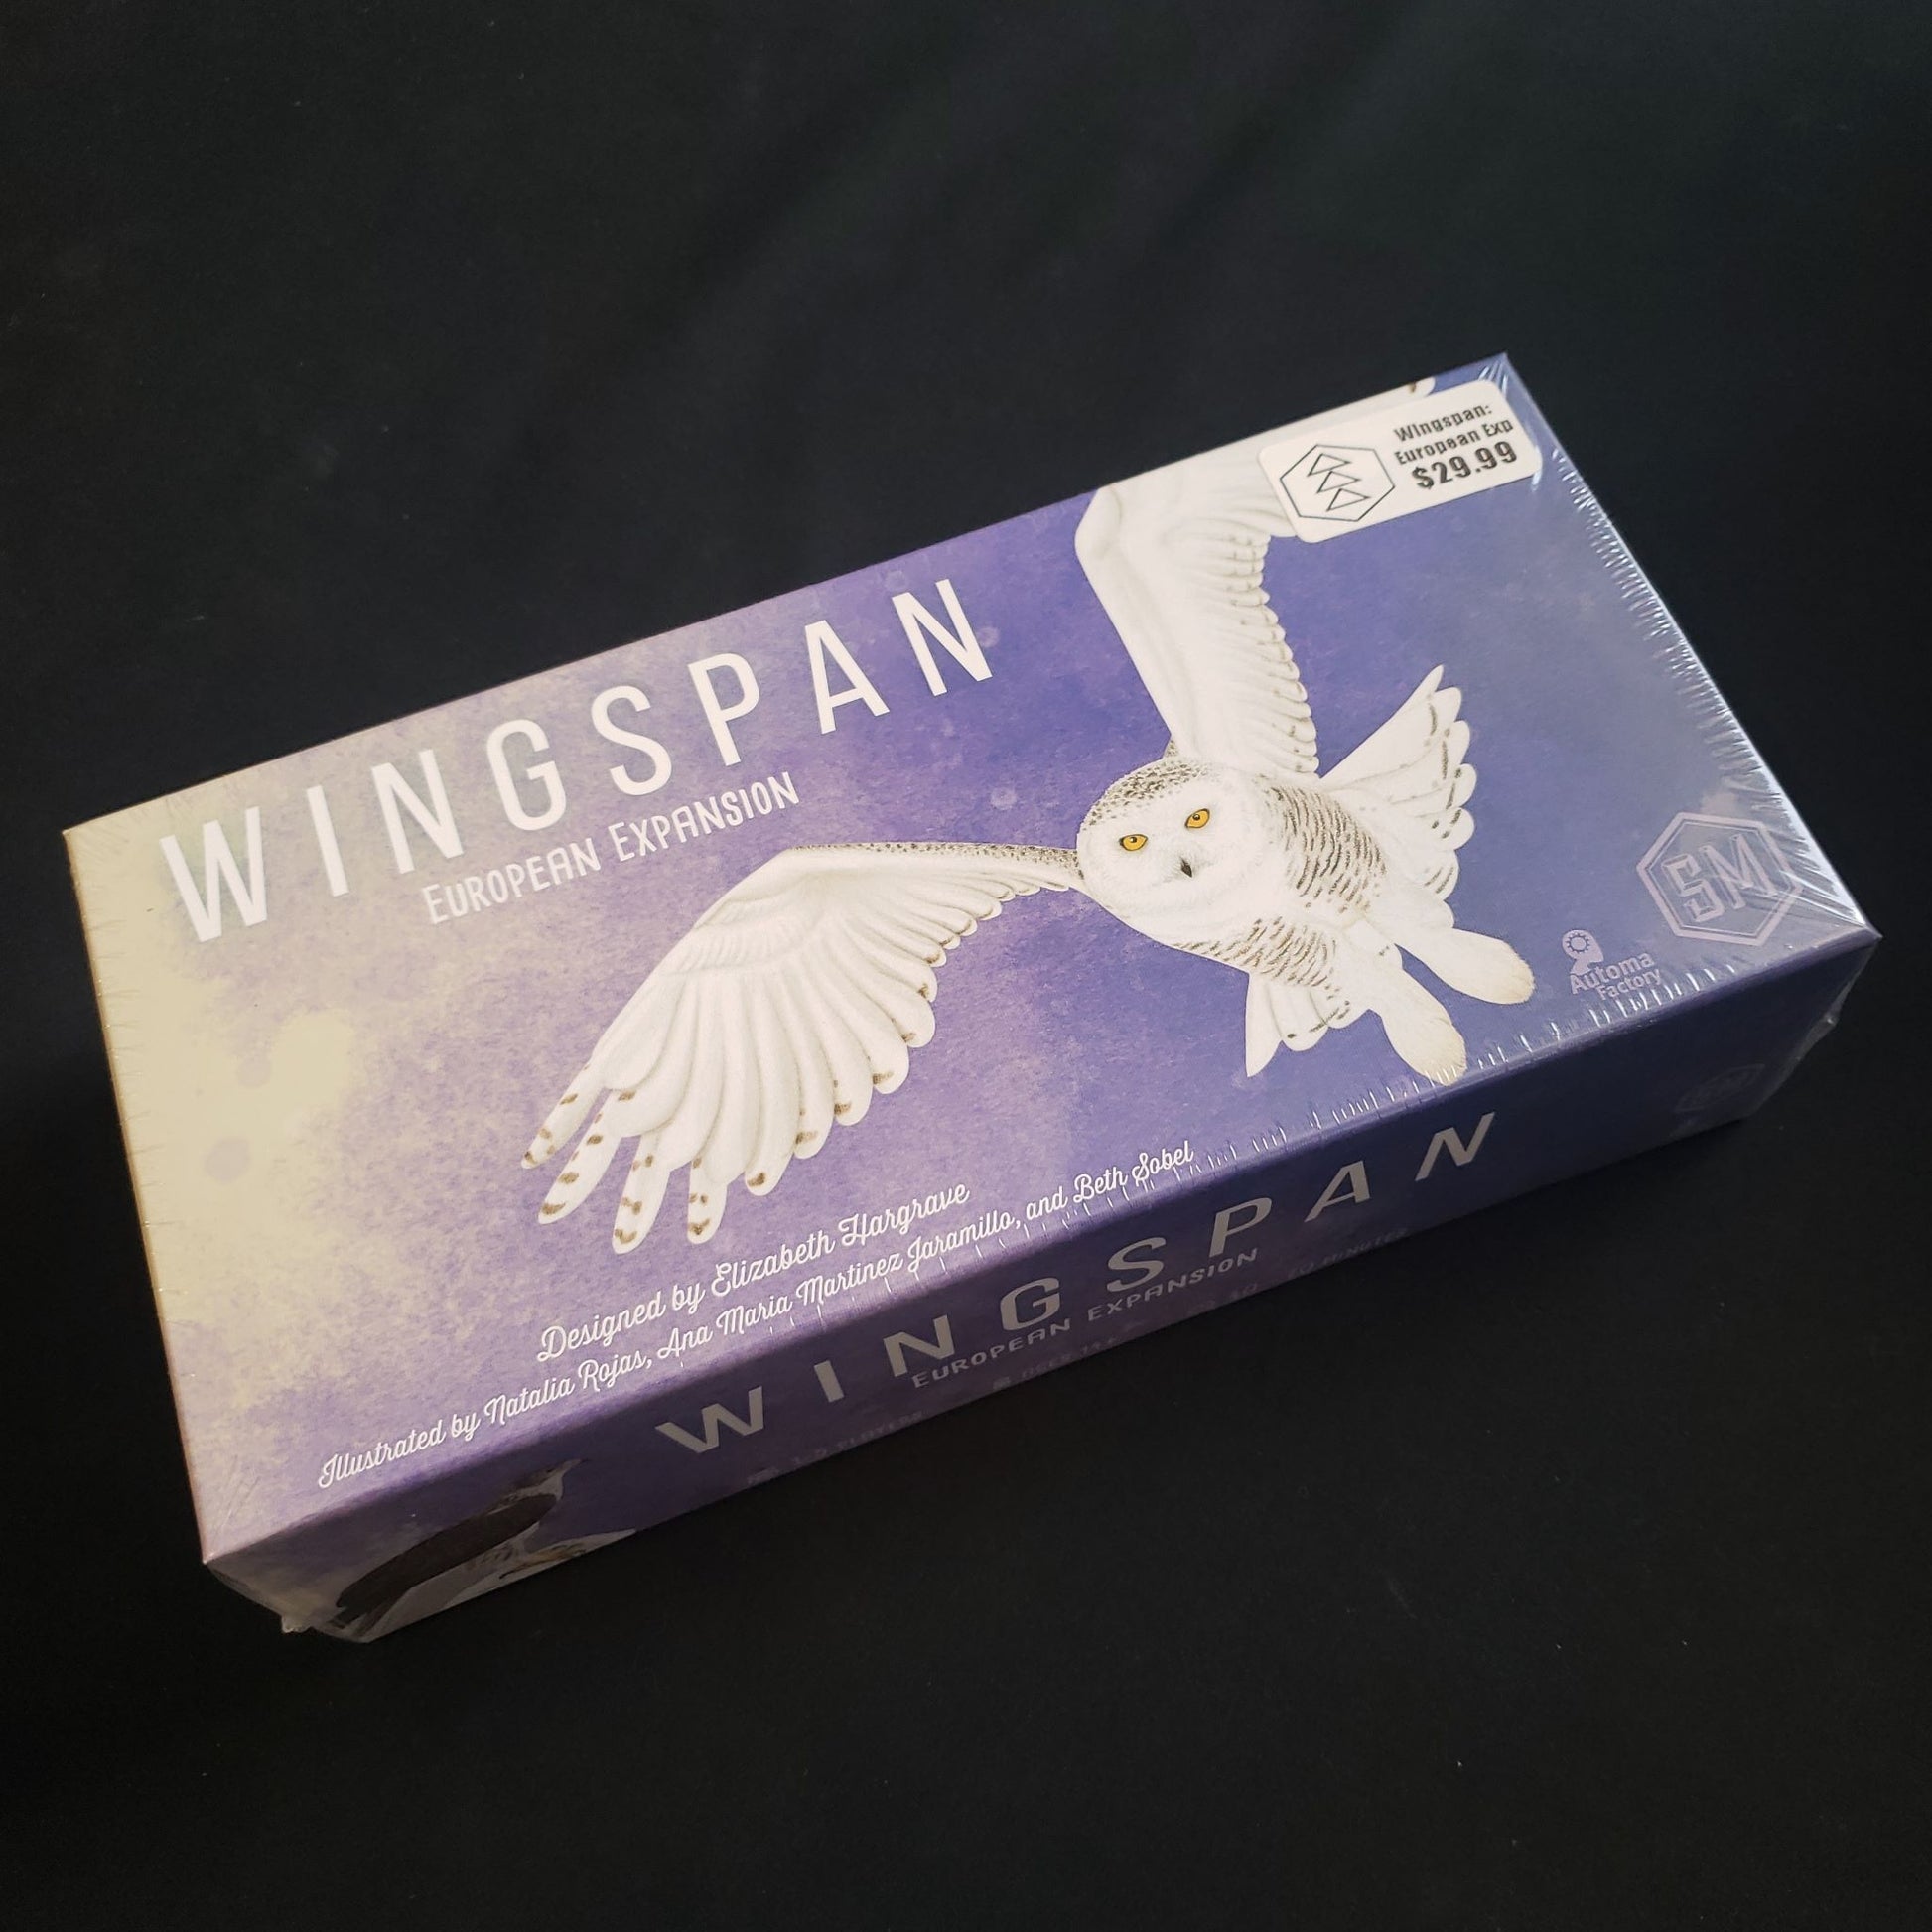 Wingspan board game: European expansion - front cover of box